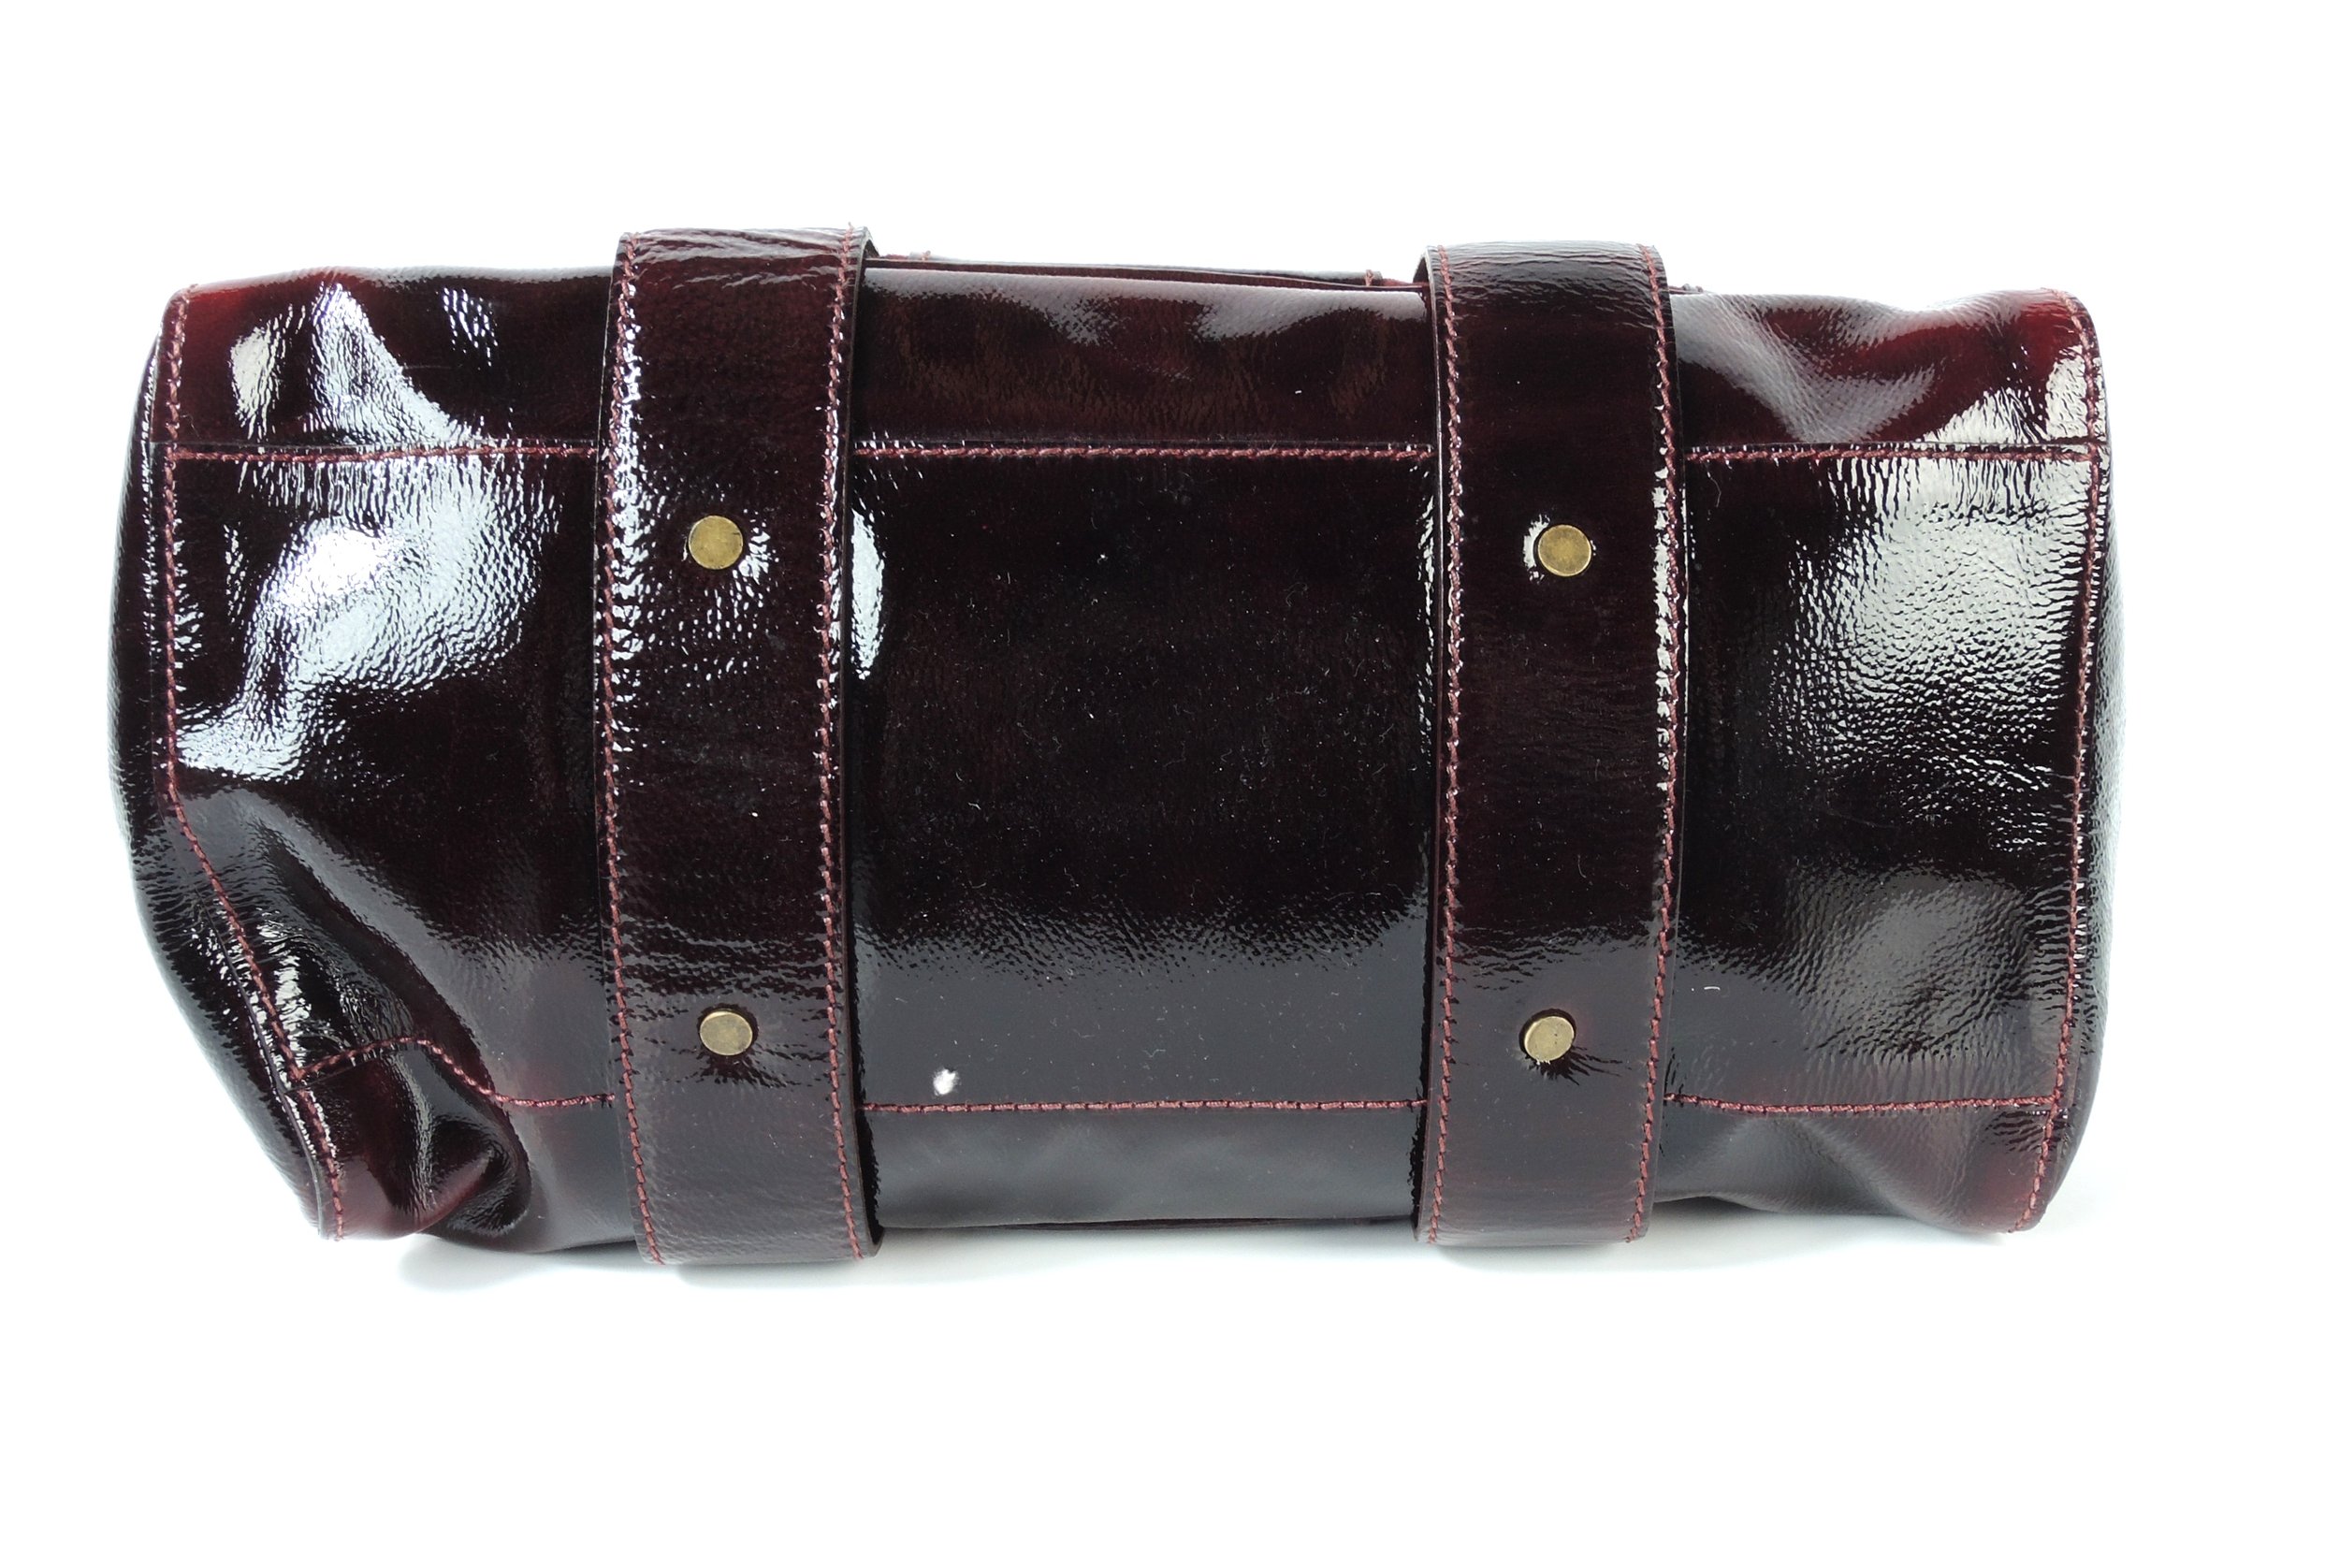 LOUIS VUITTON, Alma in burgundy patent leather